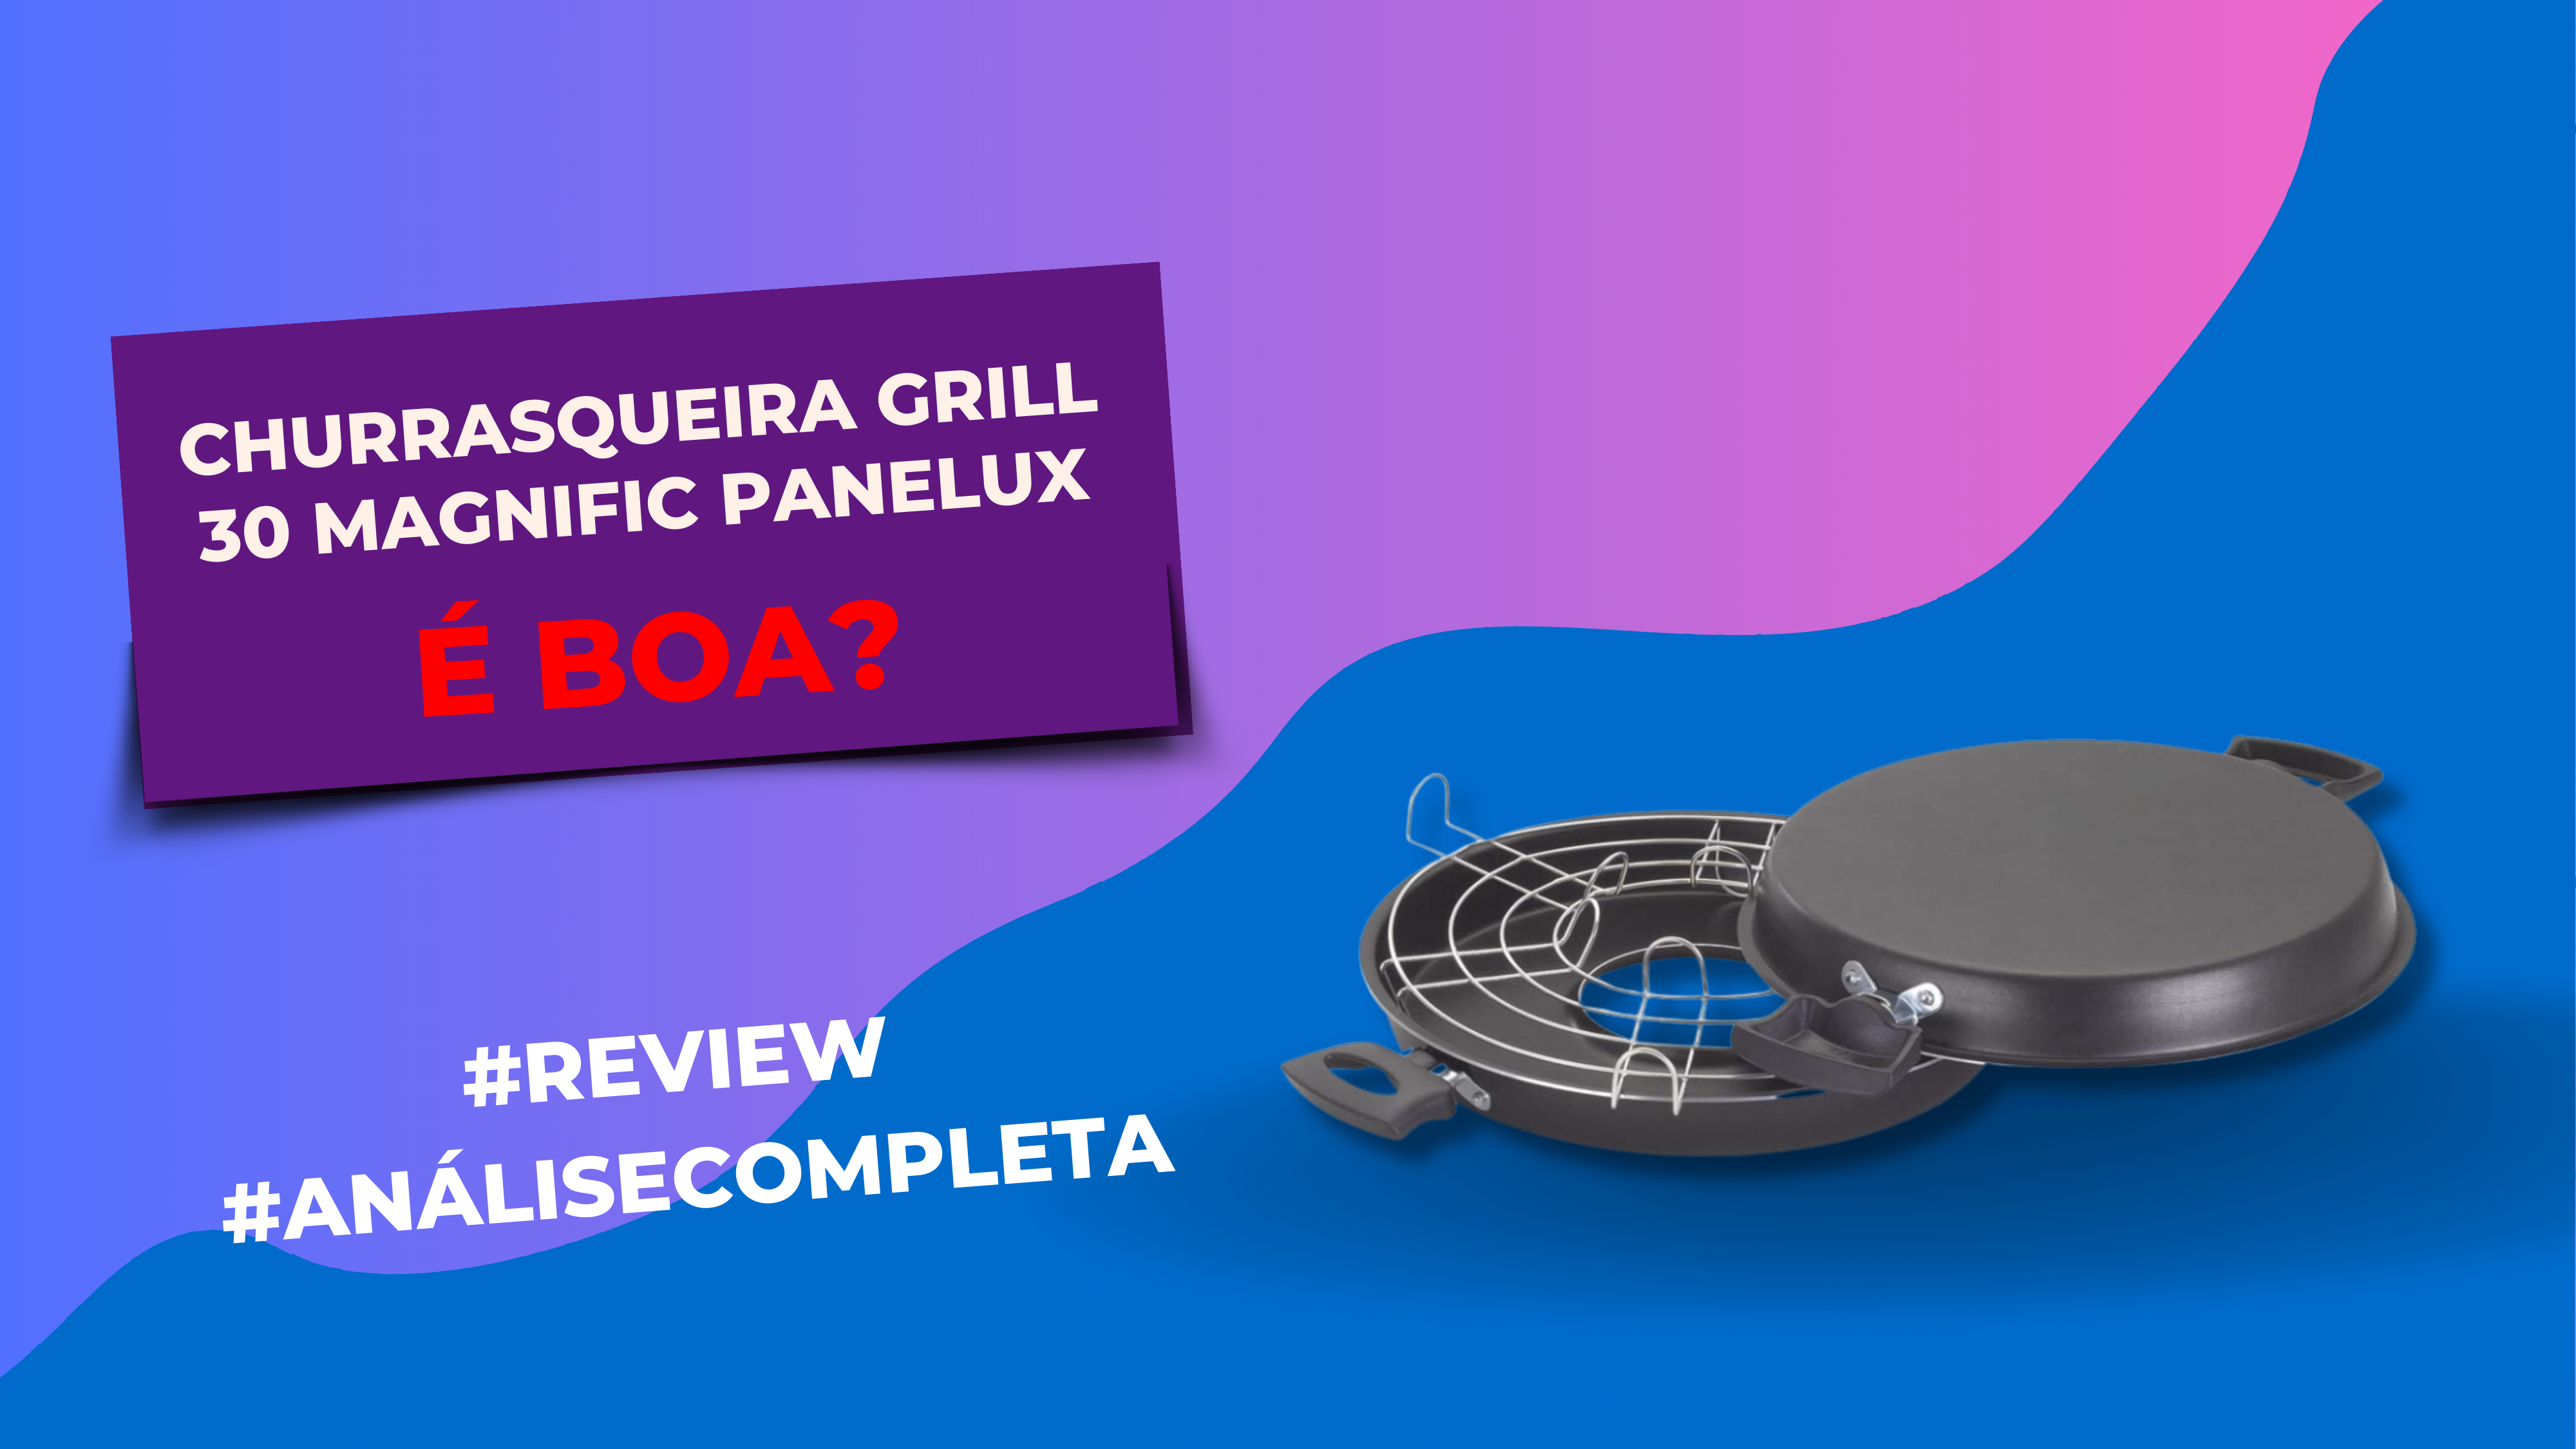 Churrasqueira Grill 30 Magnific Panelux